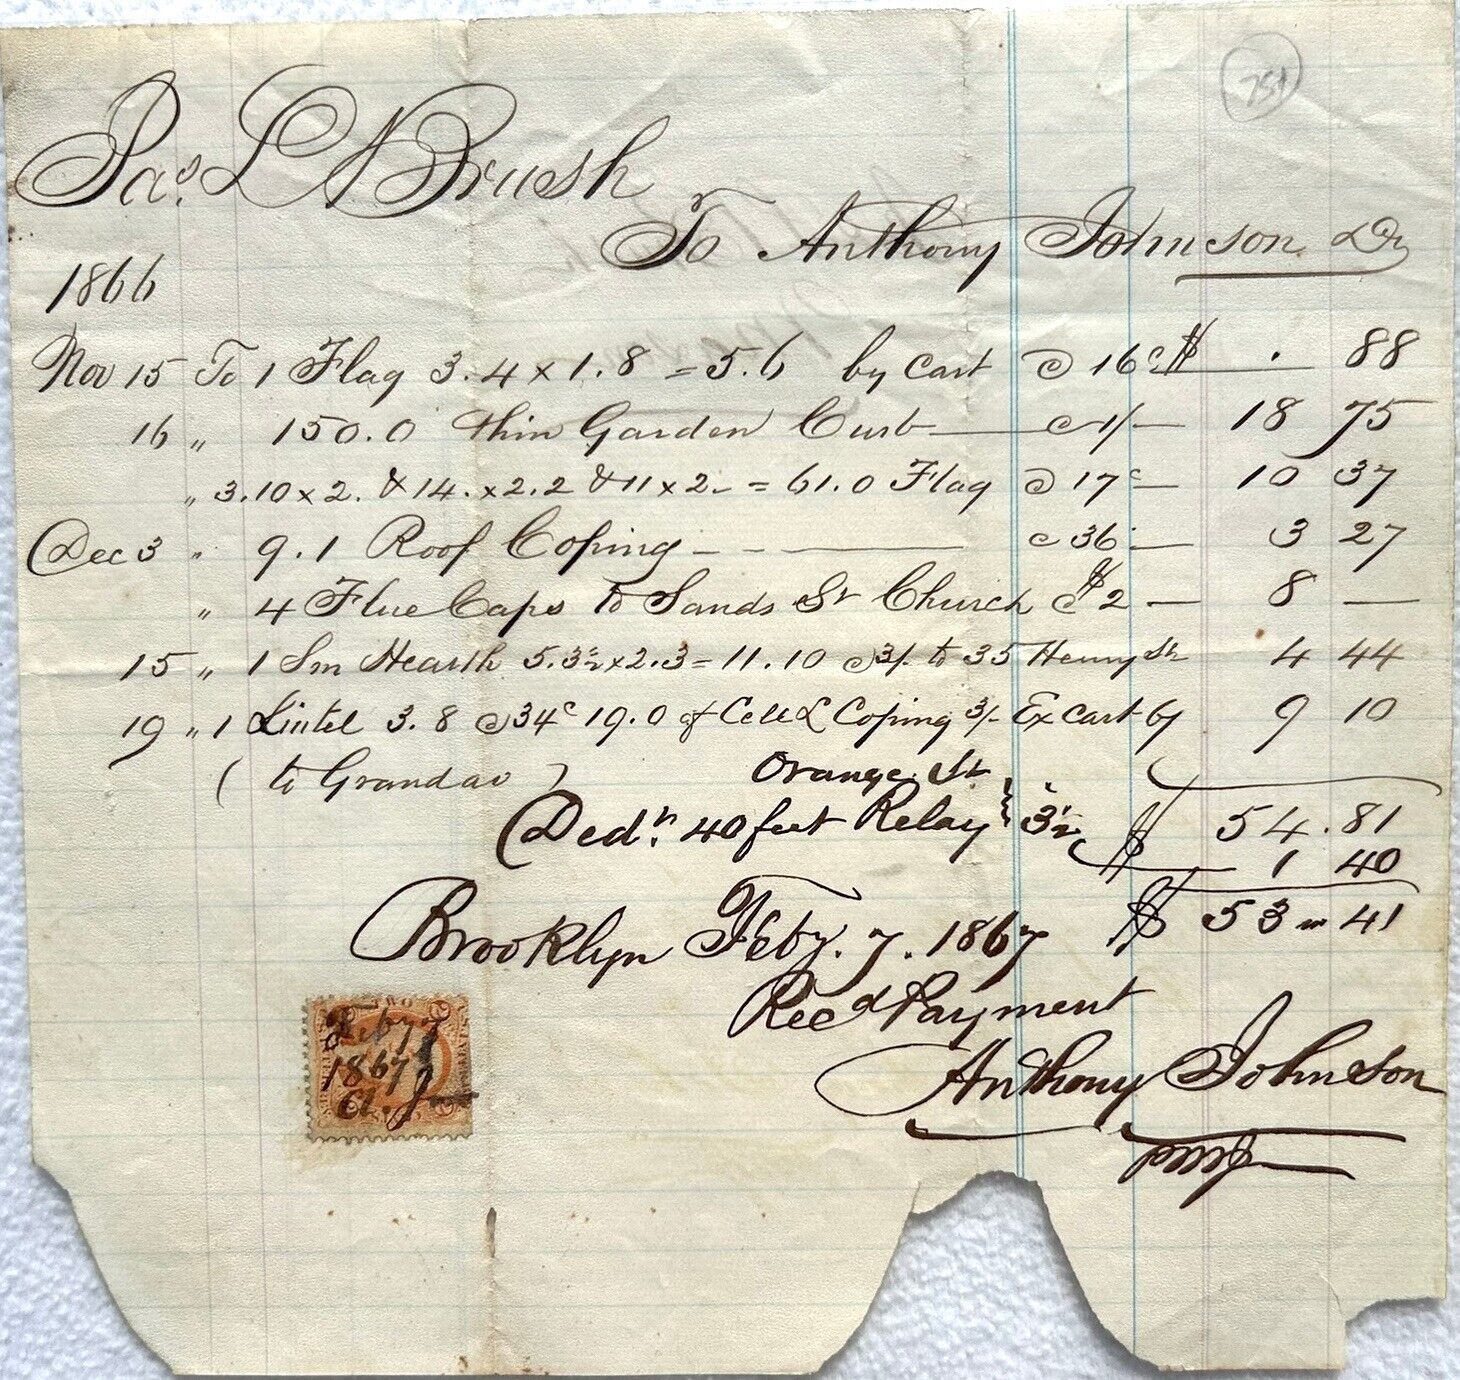 Antique 1866 Handwritten Receipt For Landscaping Work Done in Brooklyn, NY